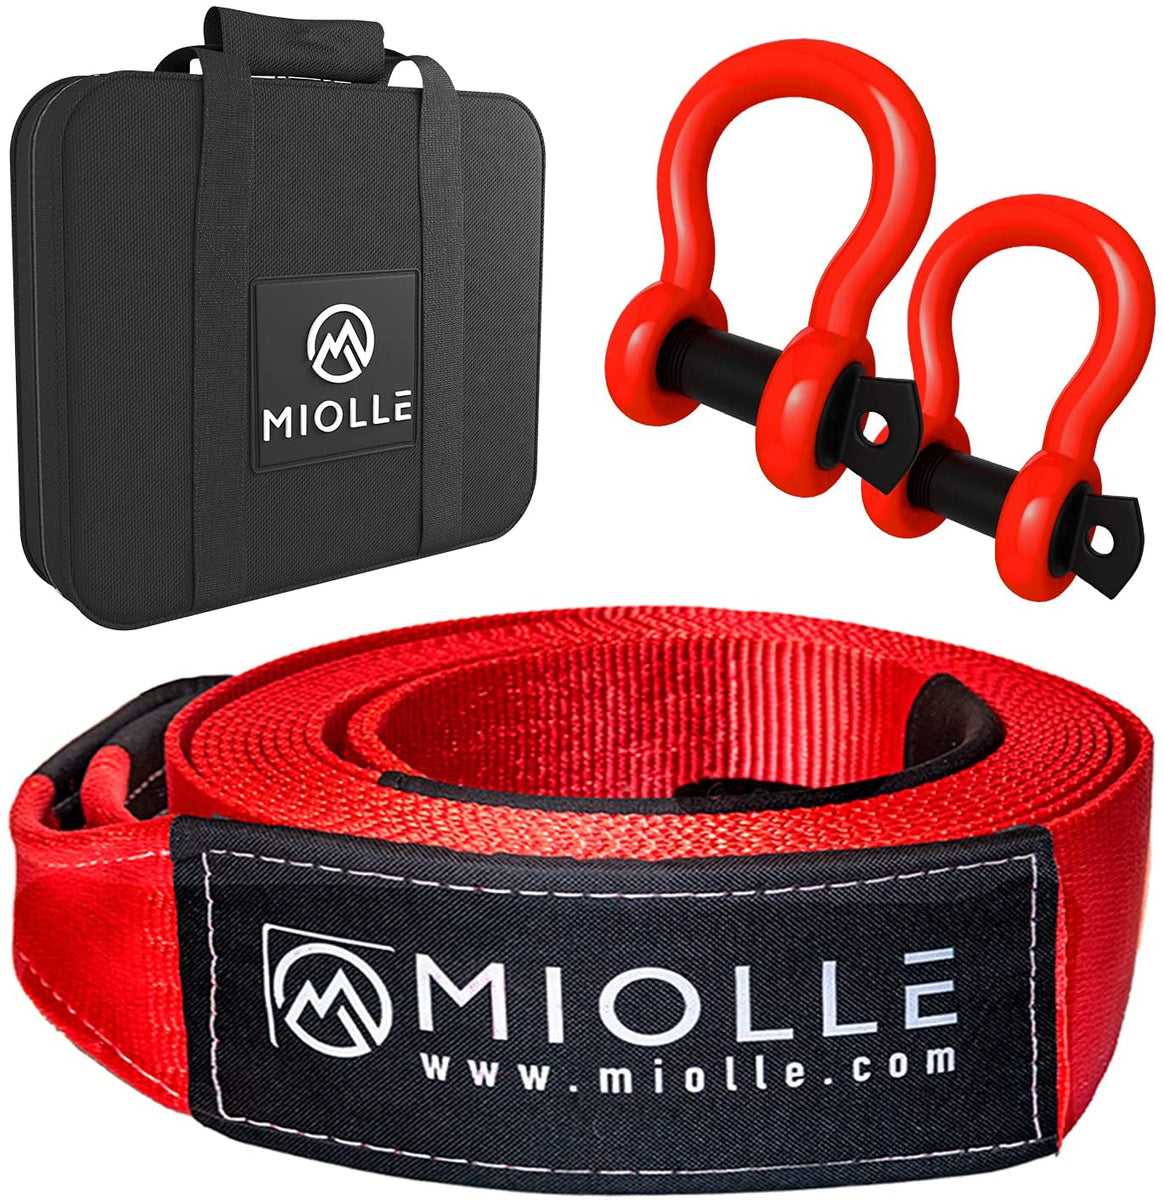 Miolle Tow Strap 2”x20'- 20990 lbs MBS (Lab Tested) Recovery Strap Kit